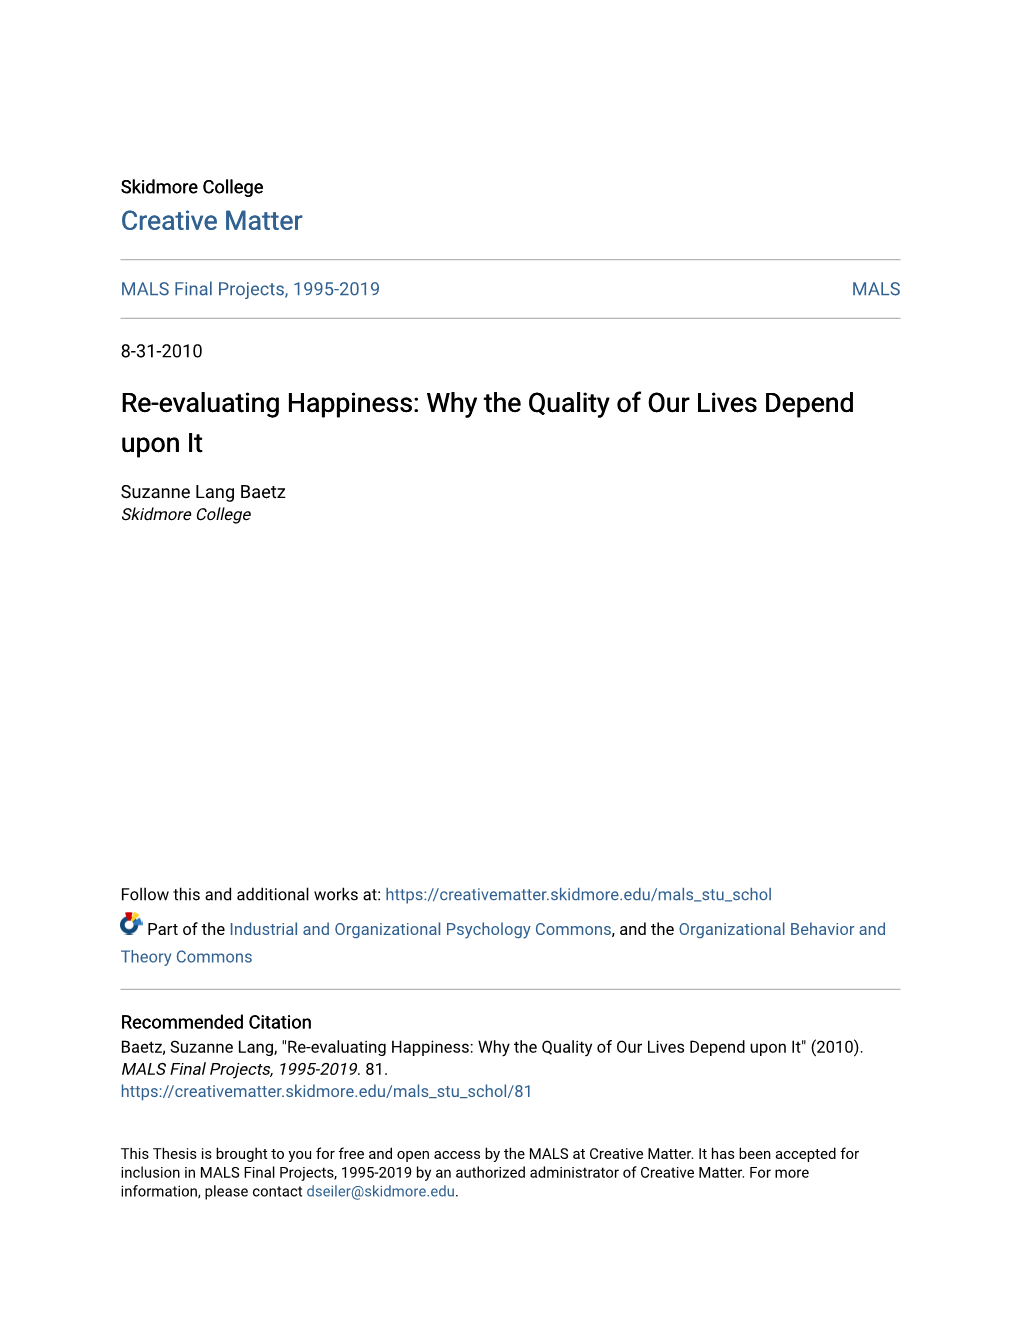 Re-Evaluating Happiness: Why the Quality of Our Lives Depend Upon It